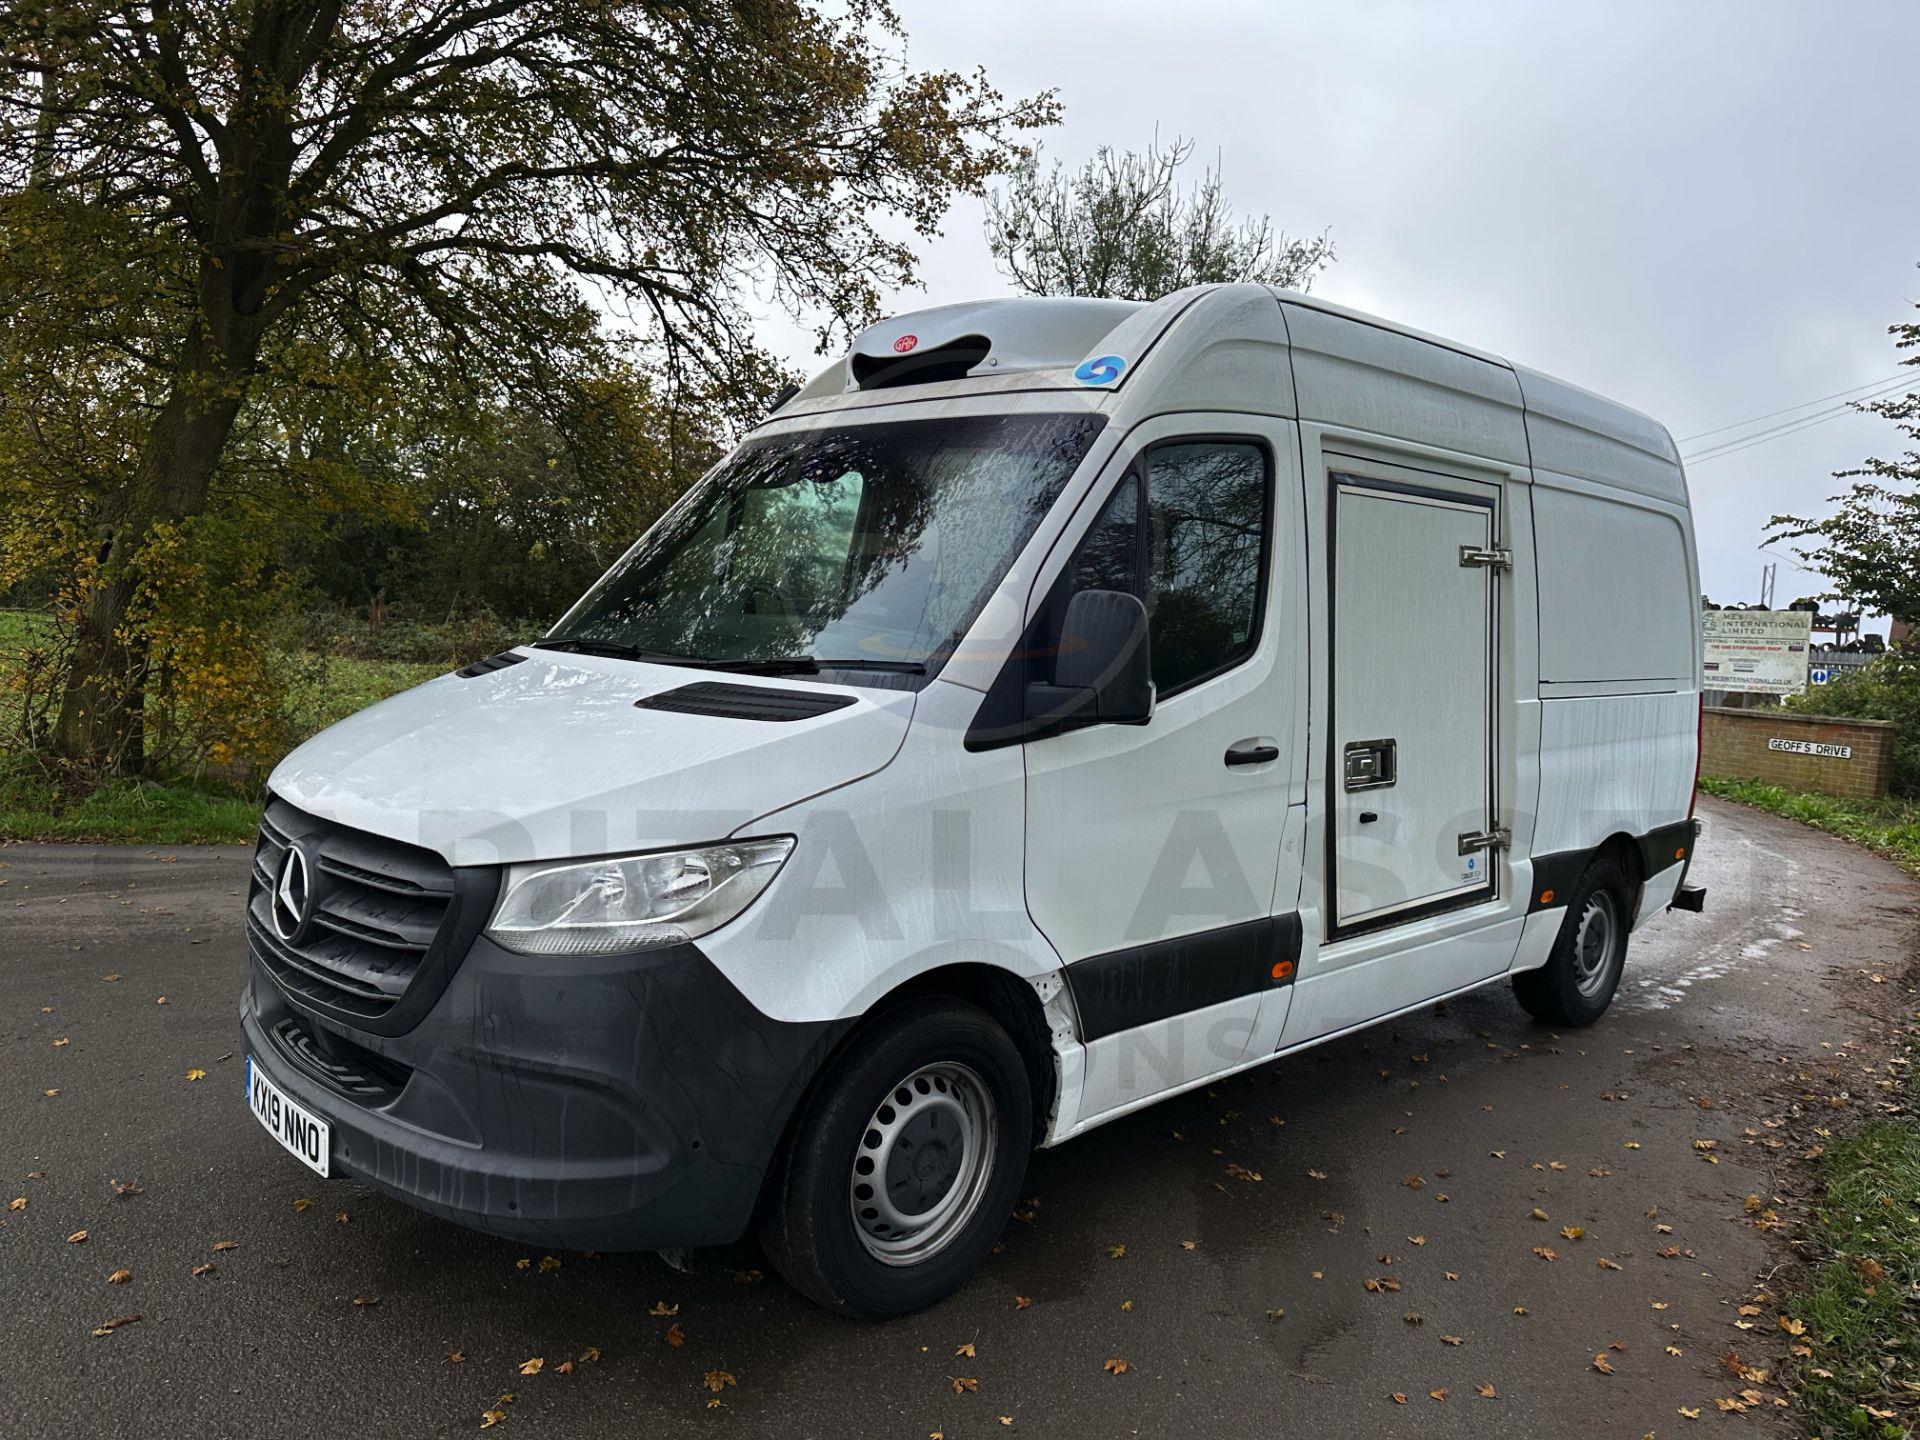 MERCEDES-BENZ SPRINTER 314 CDI *MWB - REFRIGERATED VAN* (2019 - FACELIFT MODEL) *OVERNIGHT STANDBY* - Image 6 of 45